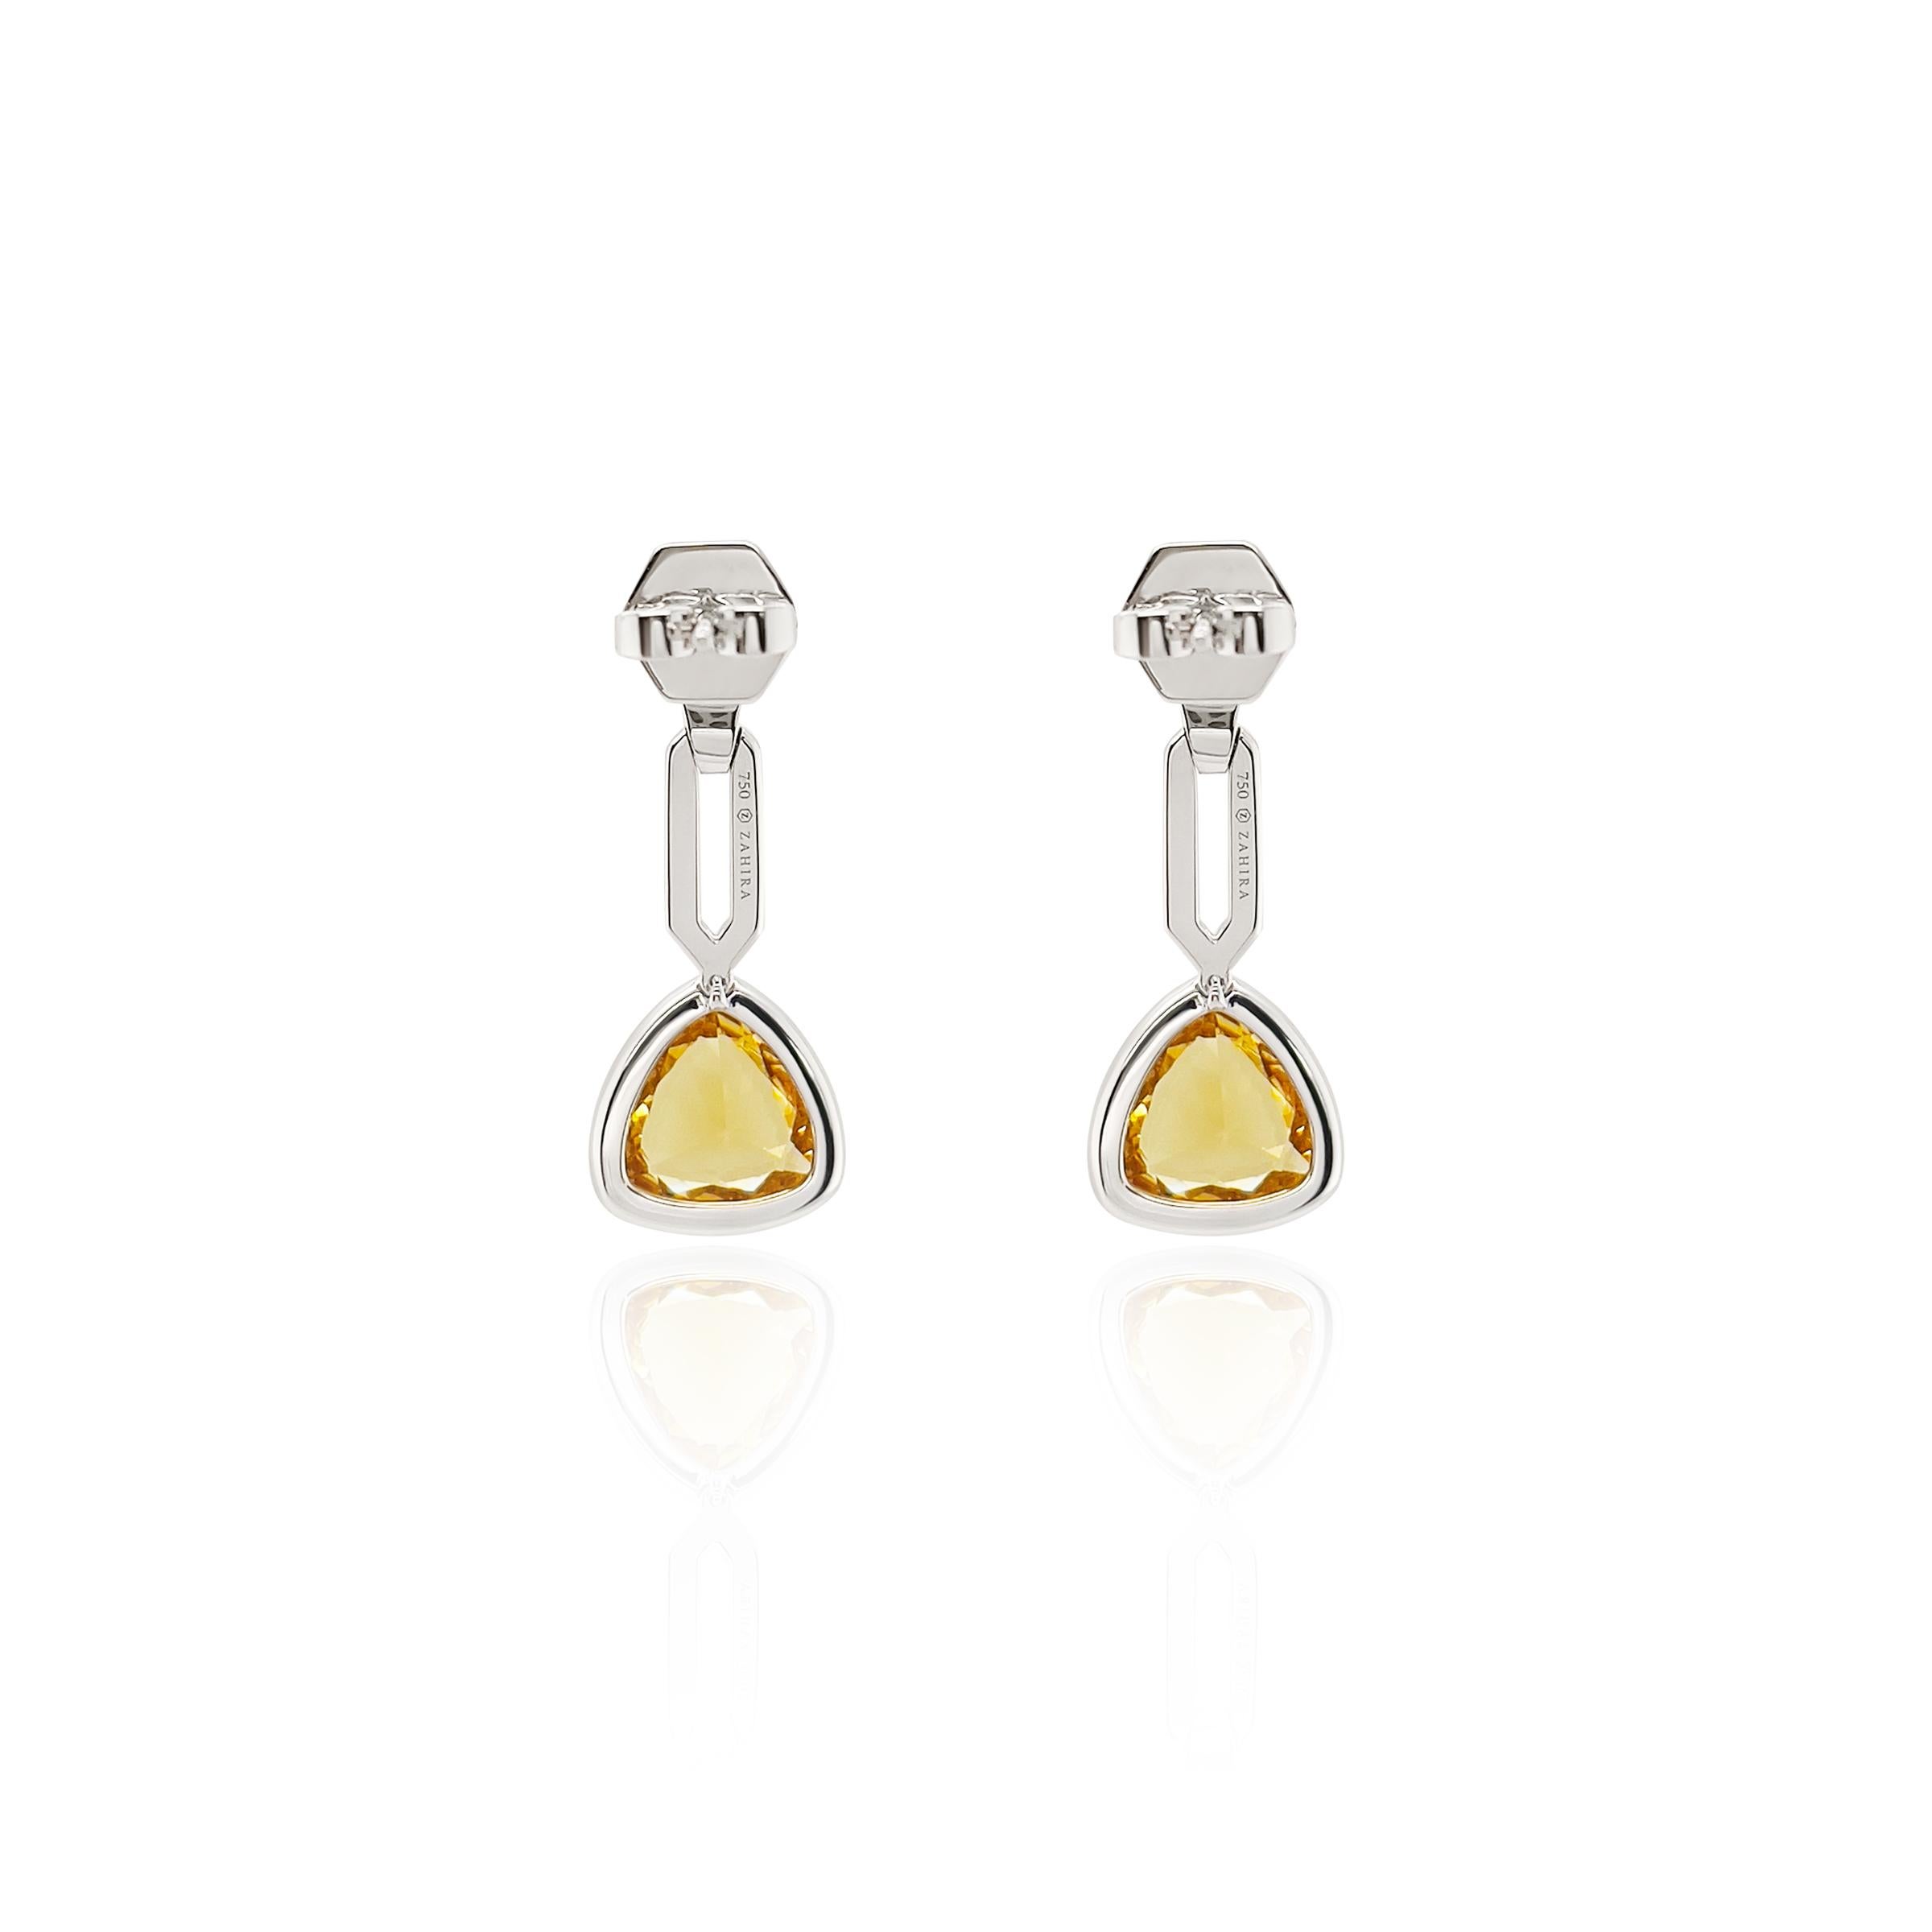 This beautiful yellow and golden stone is a Helidor which is a rare gemstone and in the beryl family 
( like an emerald ). This rare 3.97ct pair of Helidor earrings are natural and have not been color treated. Designed into dangle earrings and a